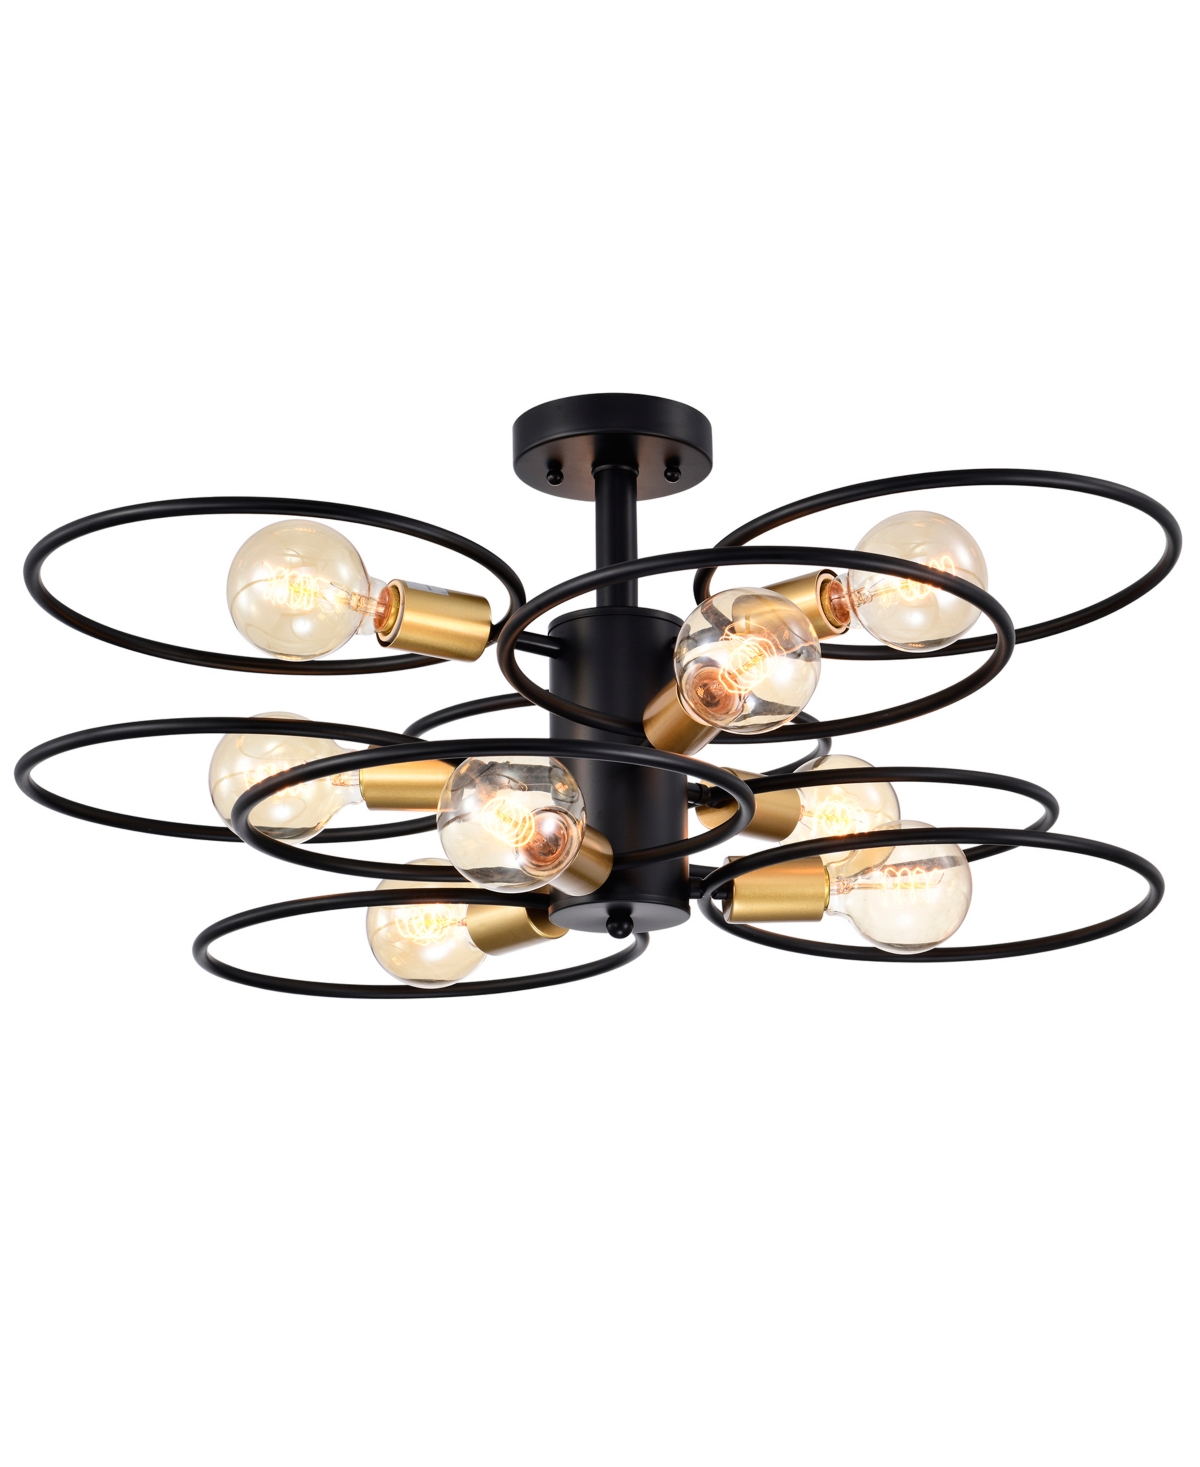 Home Accessories Camilla 28" 9-light Indoor Semi-flush Mount Ceiling Light With Light Kit And Remote In Matte Black